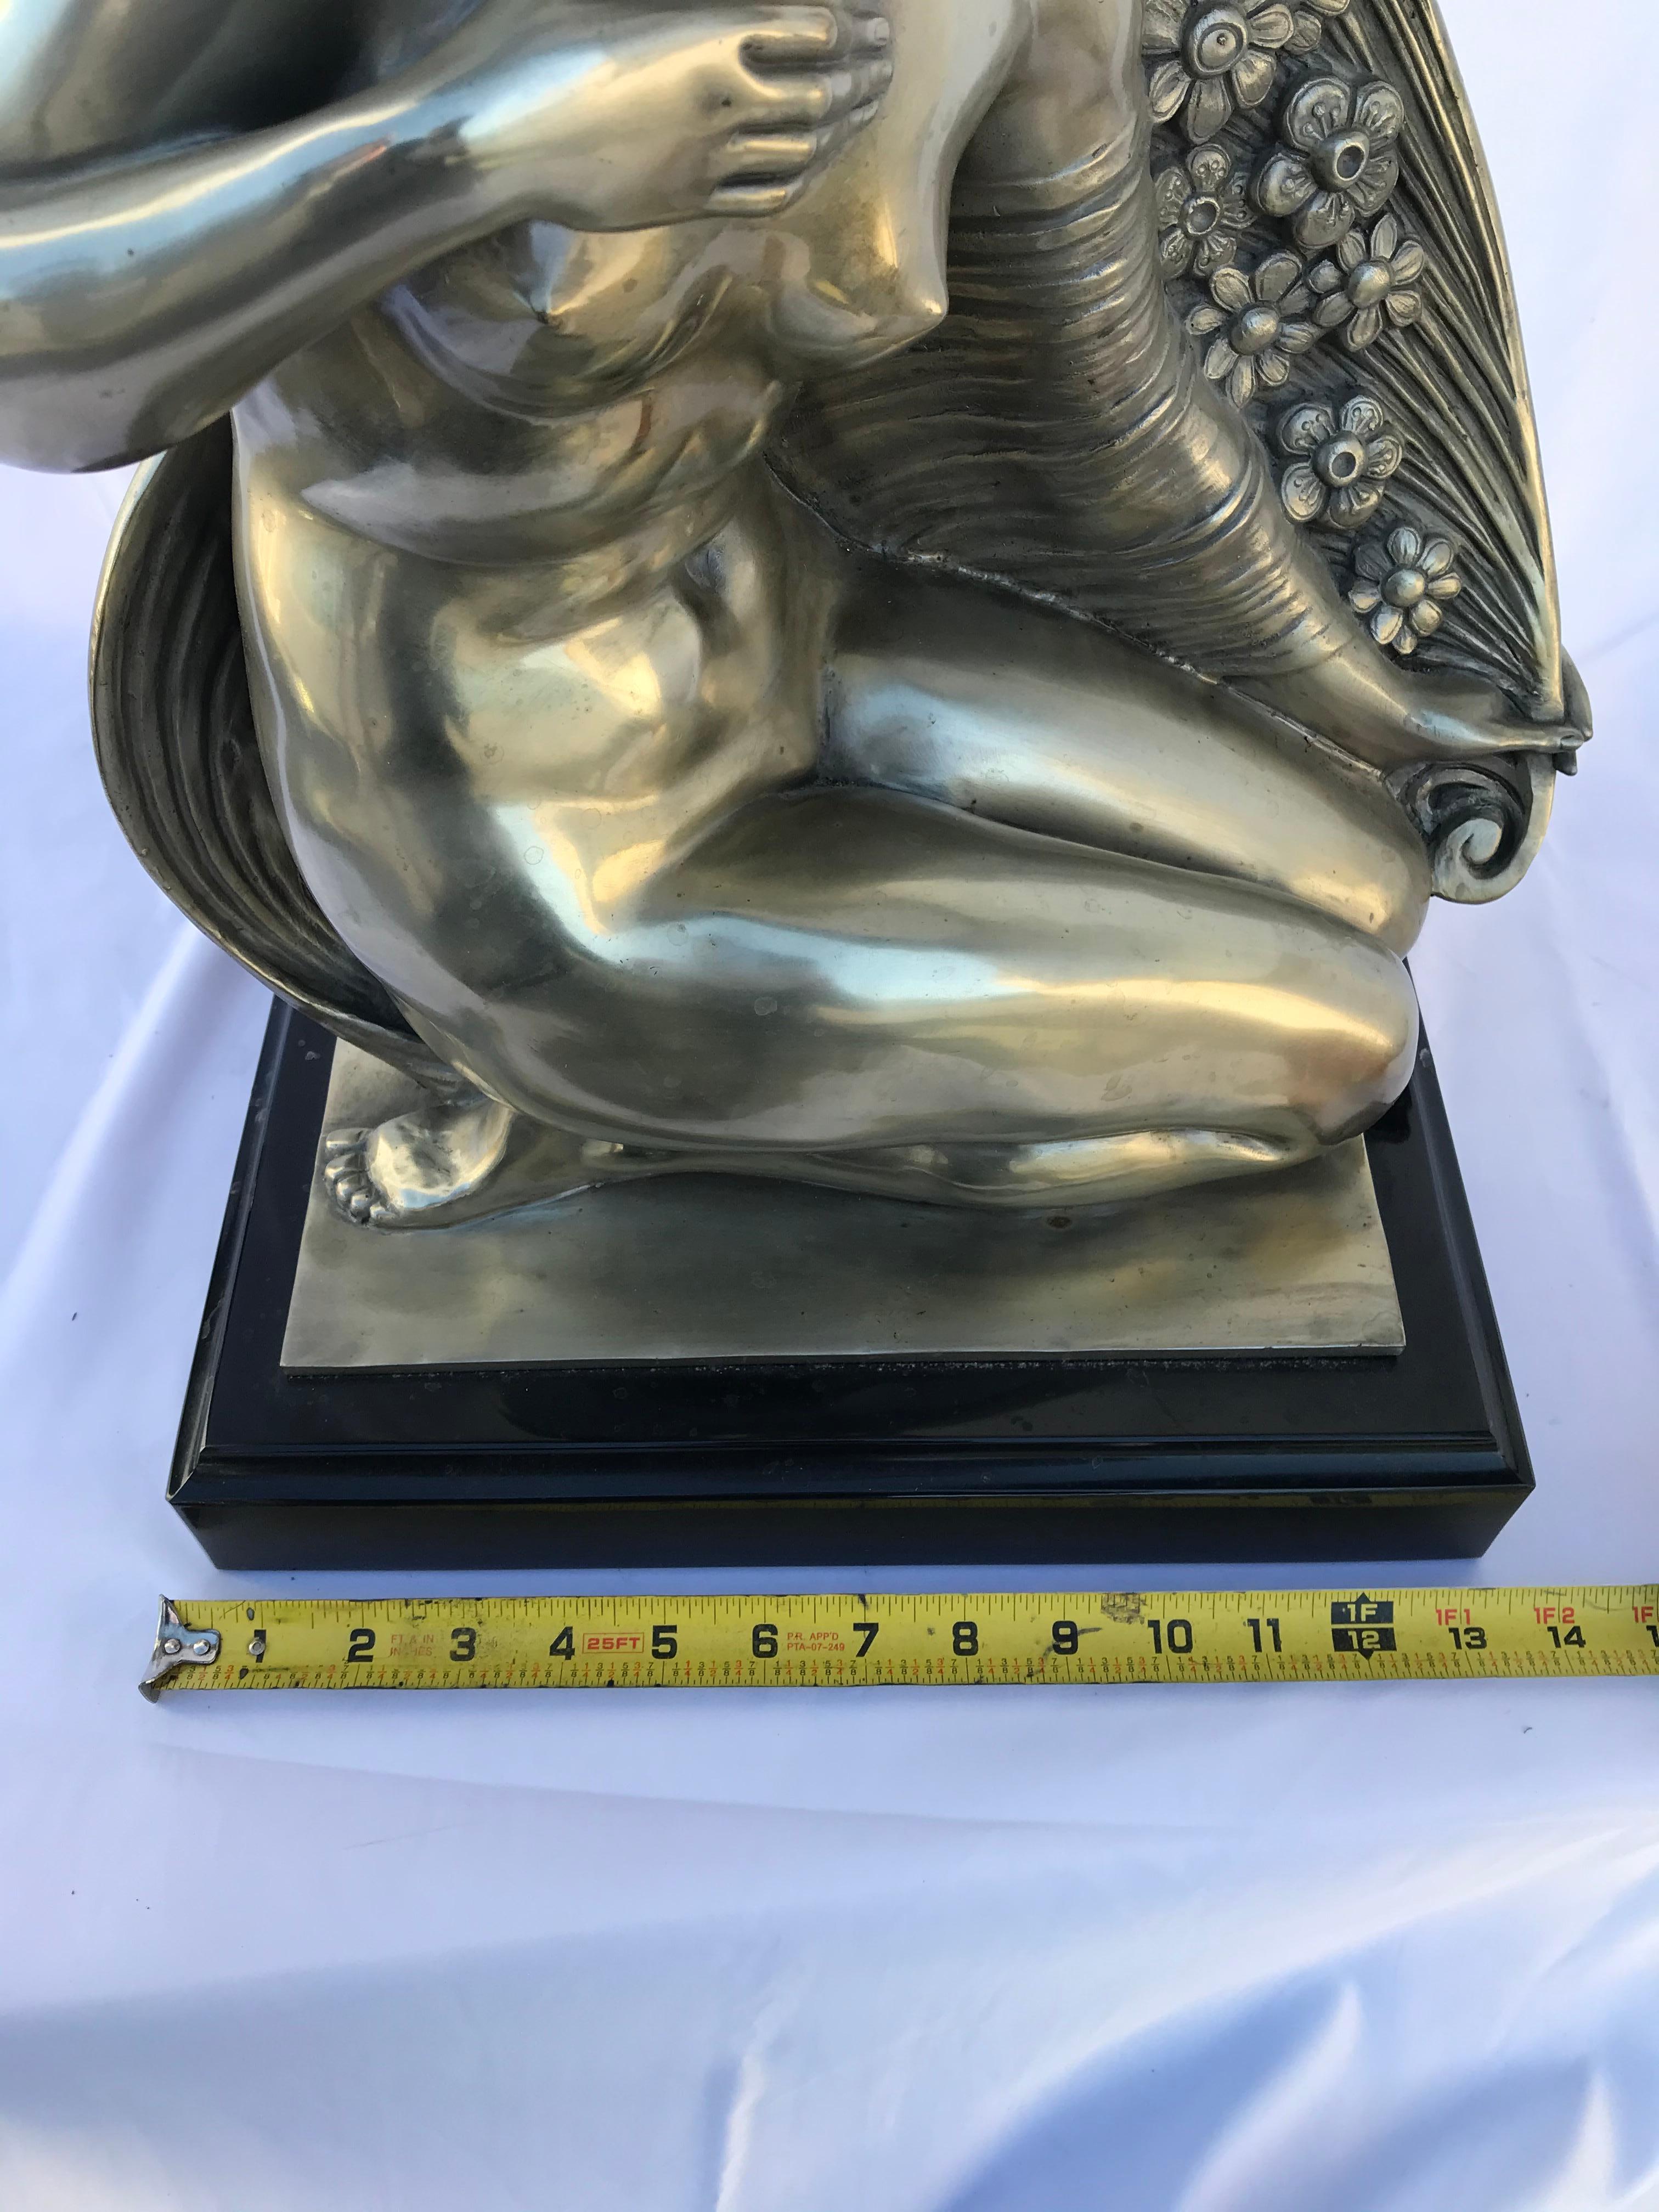 Beautiful nude girl figurine kneeling. Hi-polished silver patina on cast bronze, cast after the original by Joe Descomps listed Artist. One of his greatest sculpture. Has marks on the base. Solid block of absolute black marble. Title is (Girl with